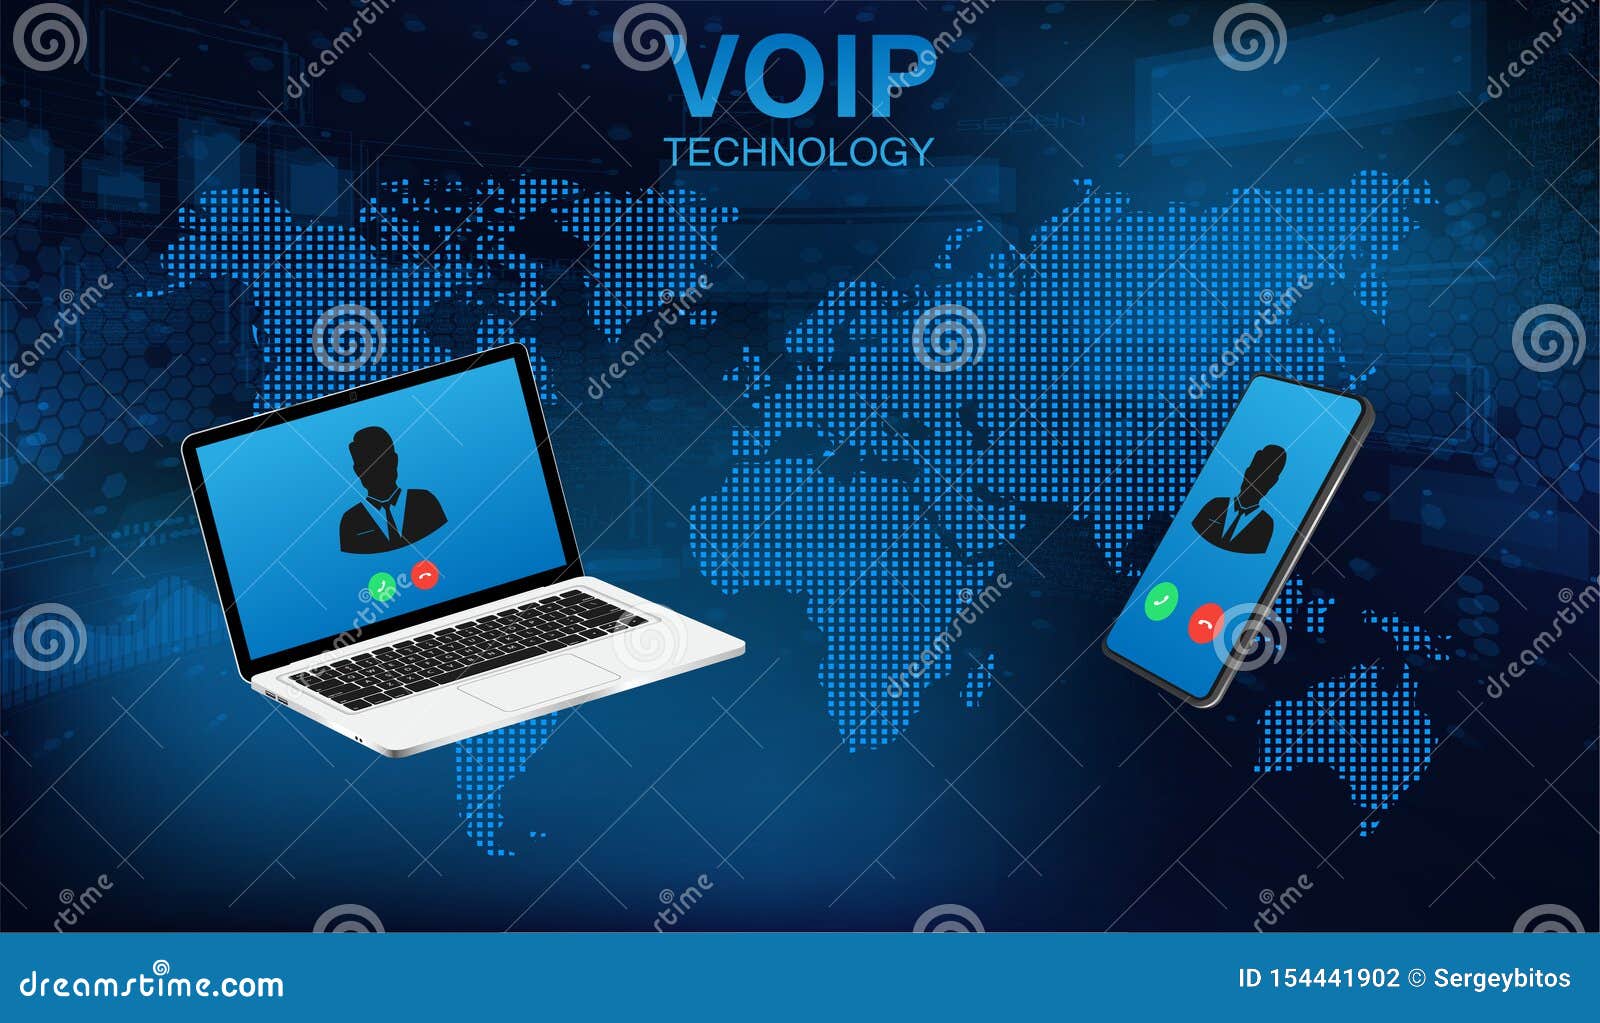 voip call system voice phone technology